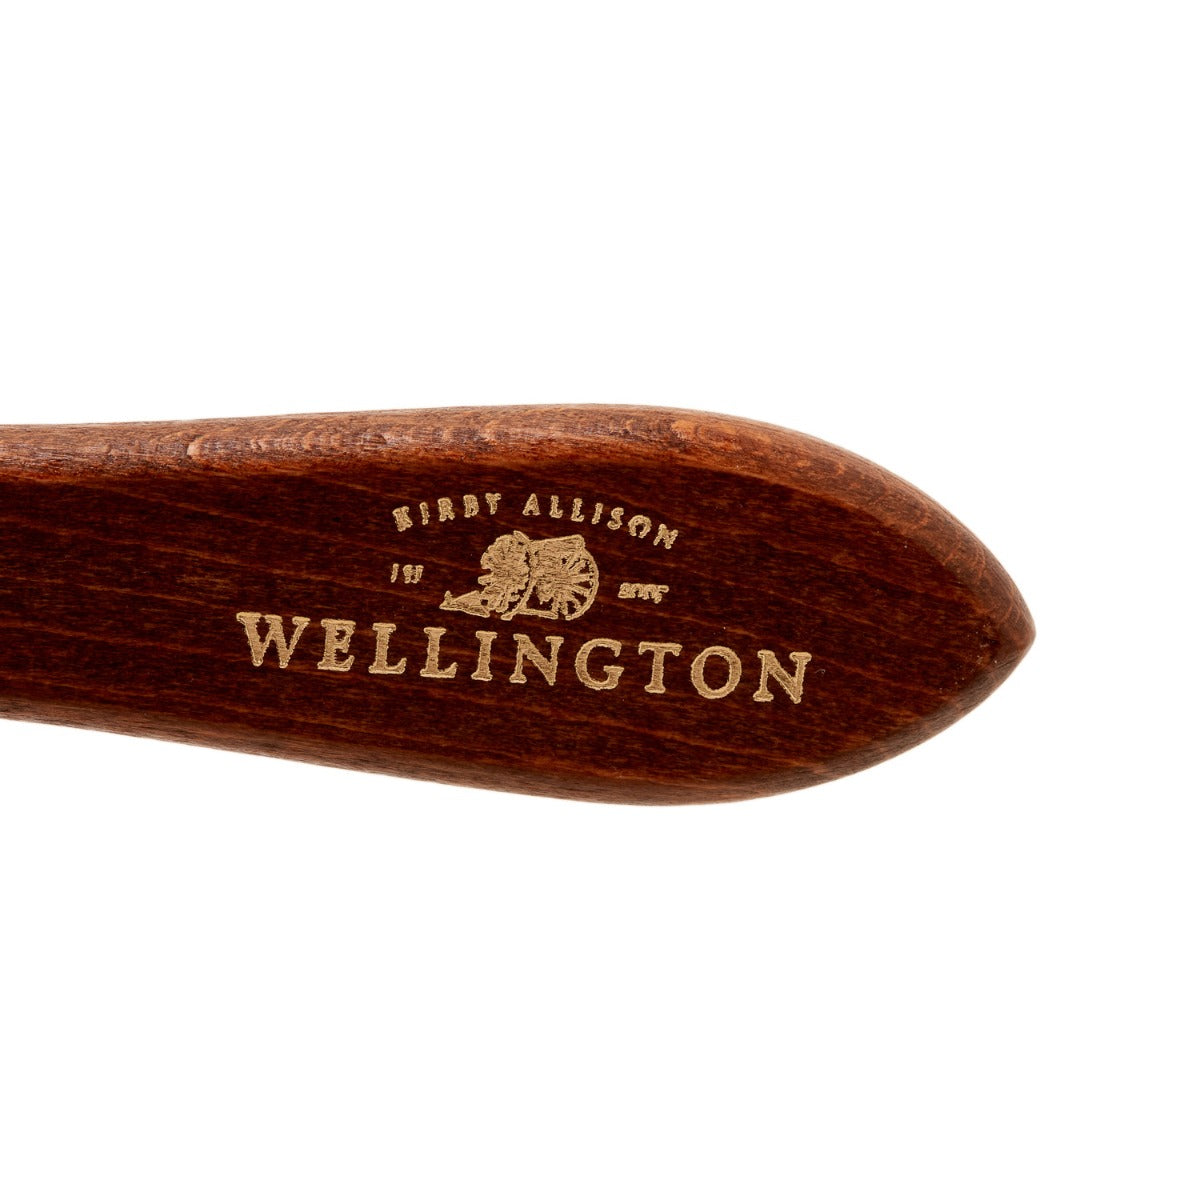 A Wellington Deluxe Shoe Polish Dauber with the word KirbyAllison.com on it, used for shoe polish applications.